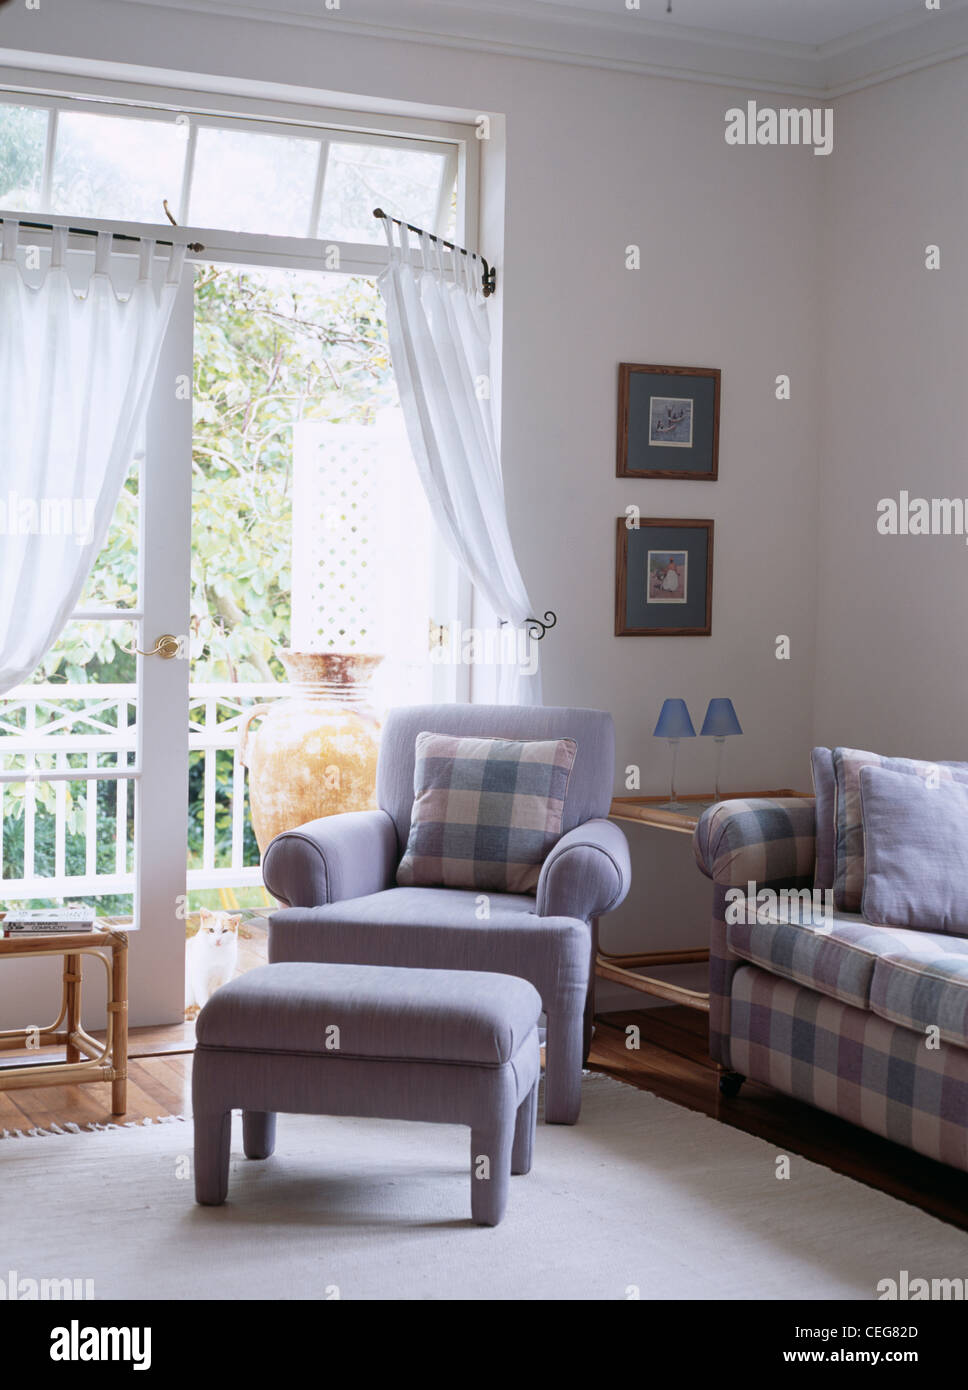 Blue armchair and footstool in front of French windows with white voile curtains on portiere rods Stock Photo